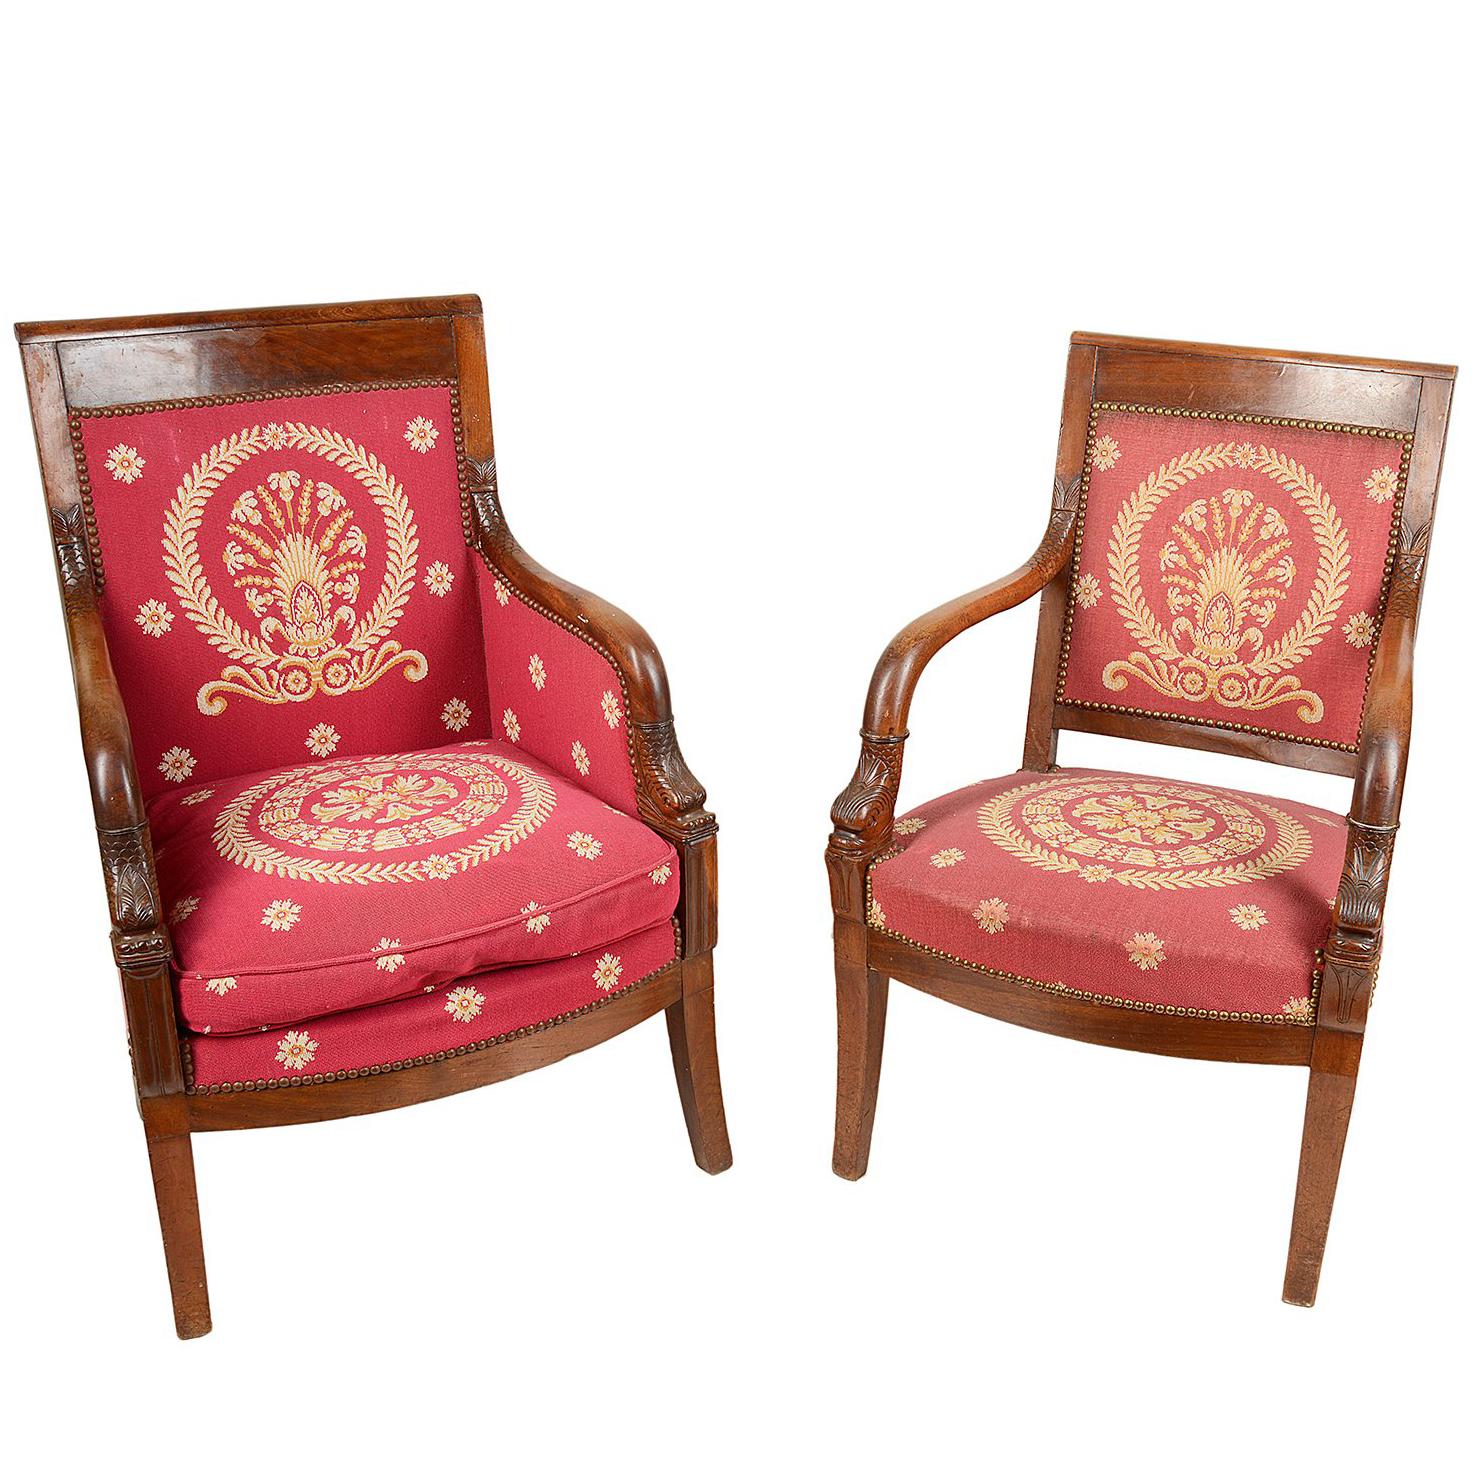 Matched Pair of French Empire Armchairs, 19th Century